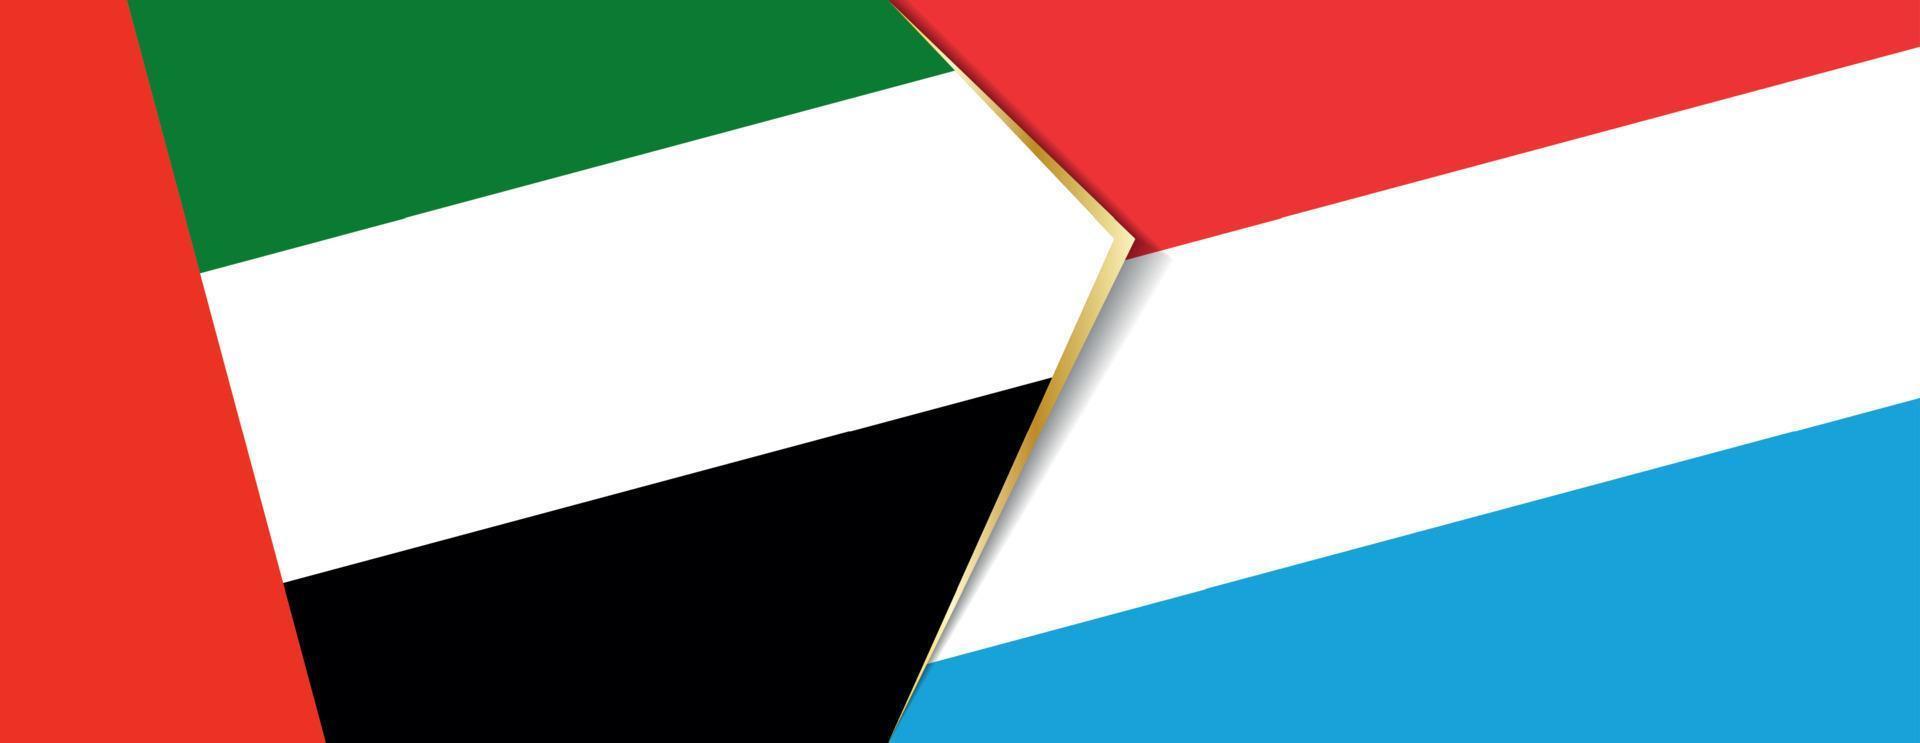 United Arab Emirates and Luxembourg flags, two vector flags.